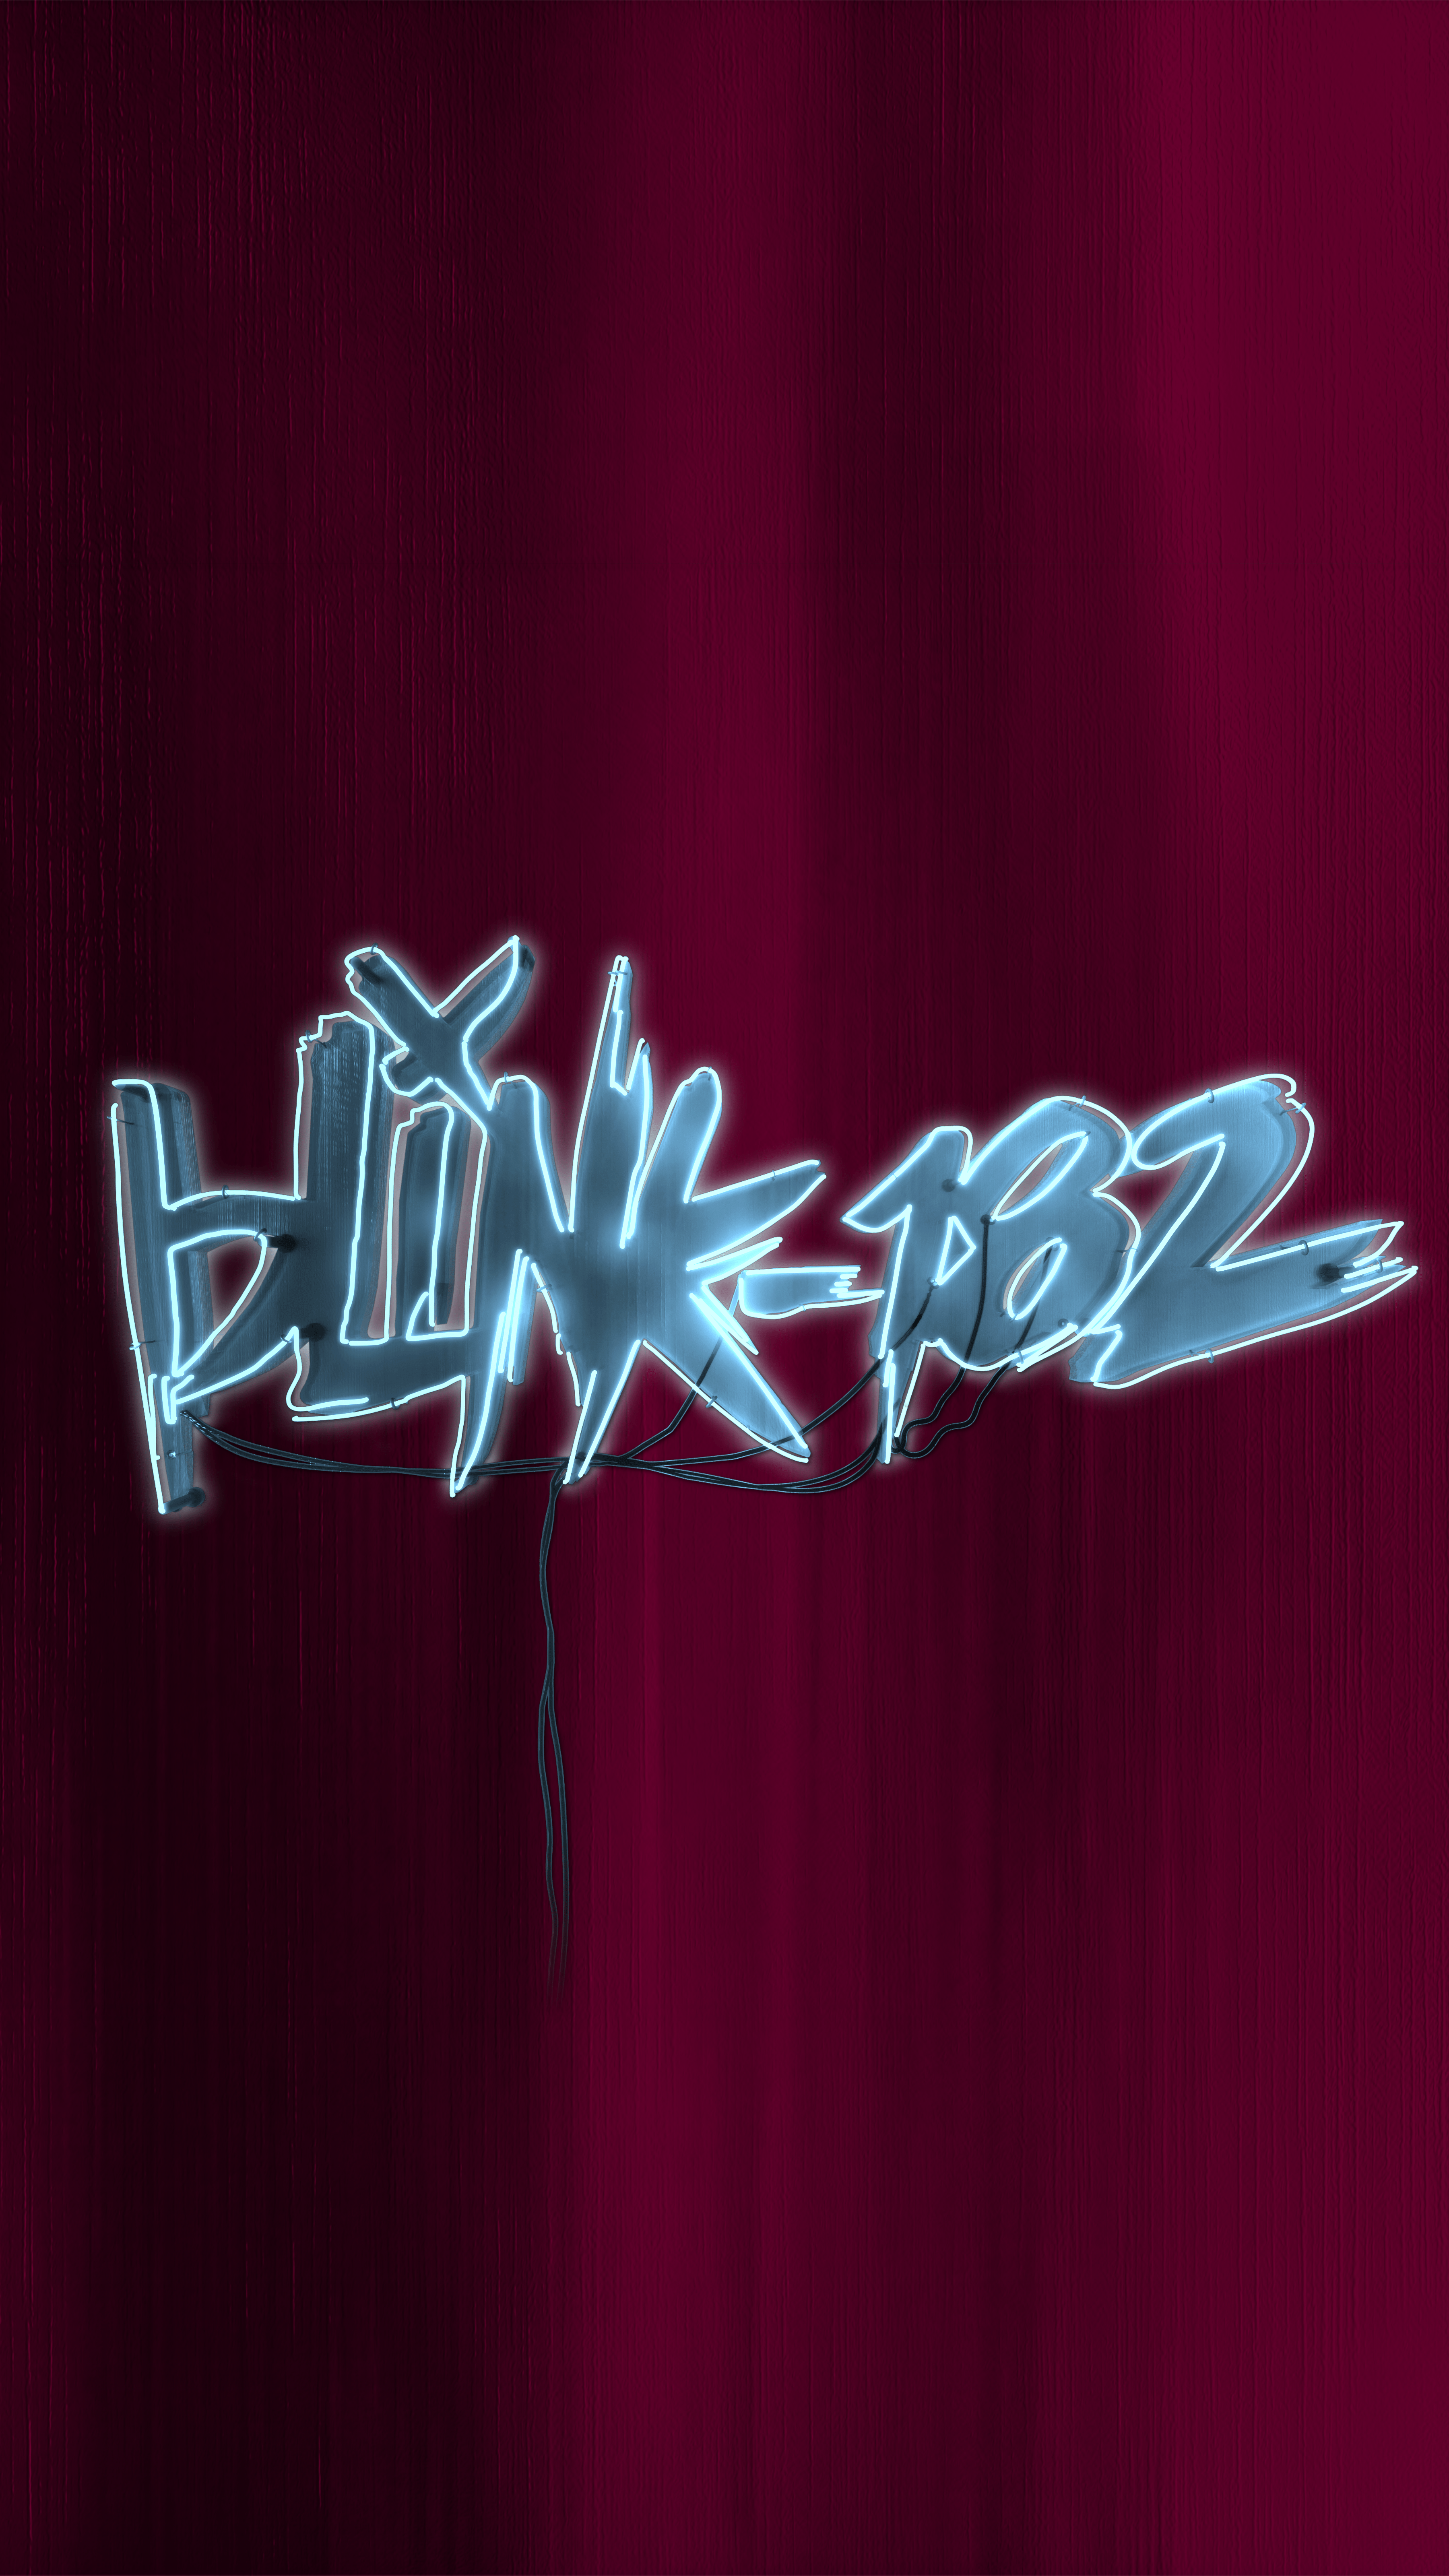 blink182 on Twitter The most liked blink20 poster from Brandon Heart is  now available httptcoRiIXYc8j httptcov9lS0Vmi  Twitter